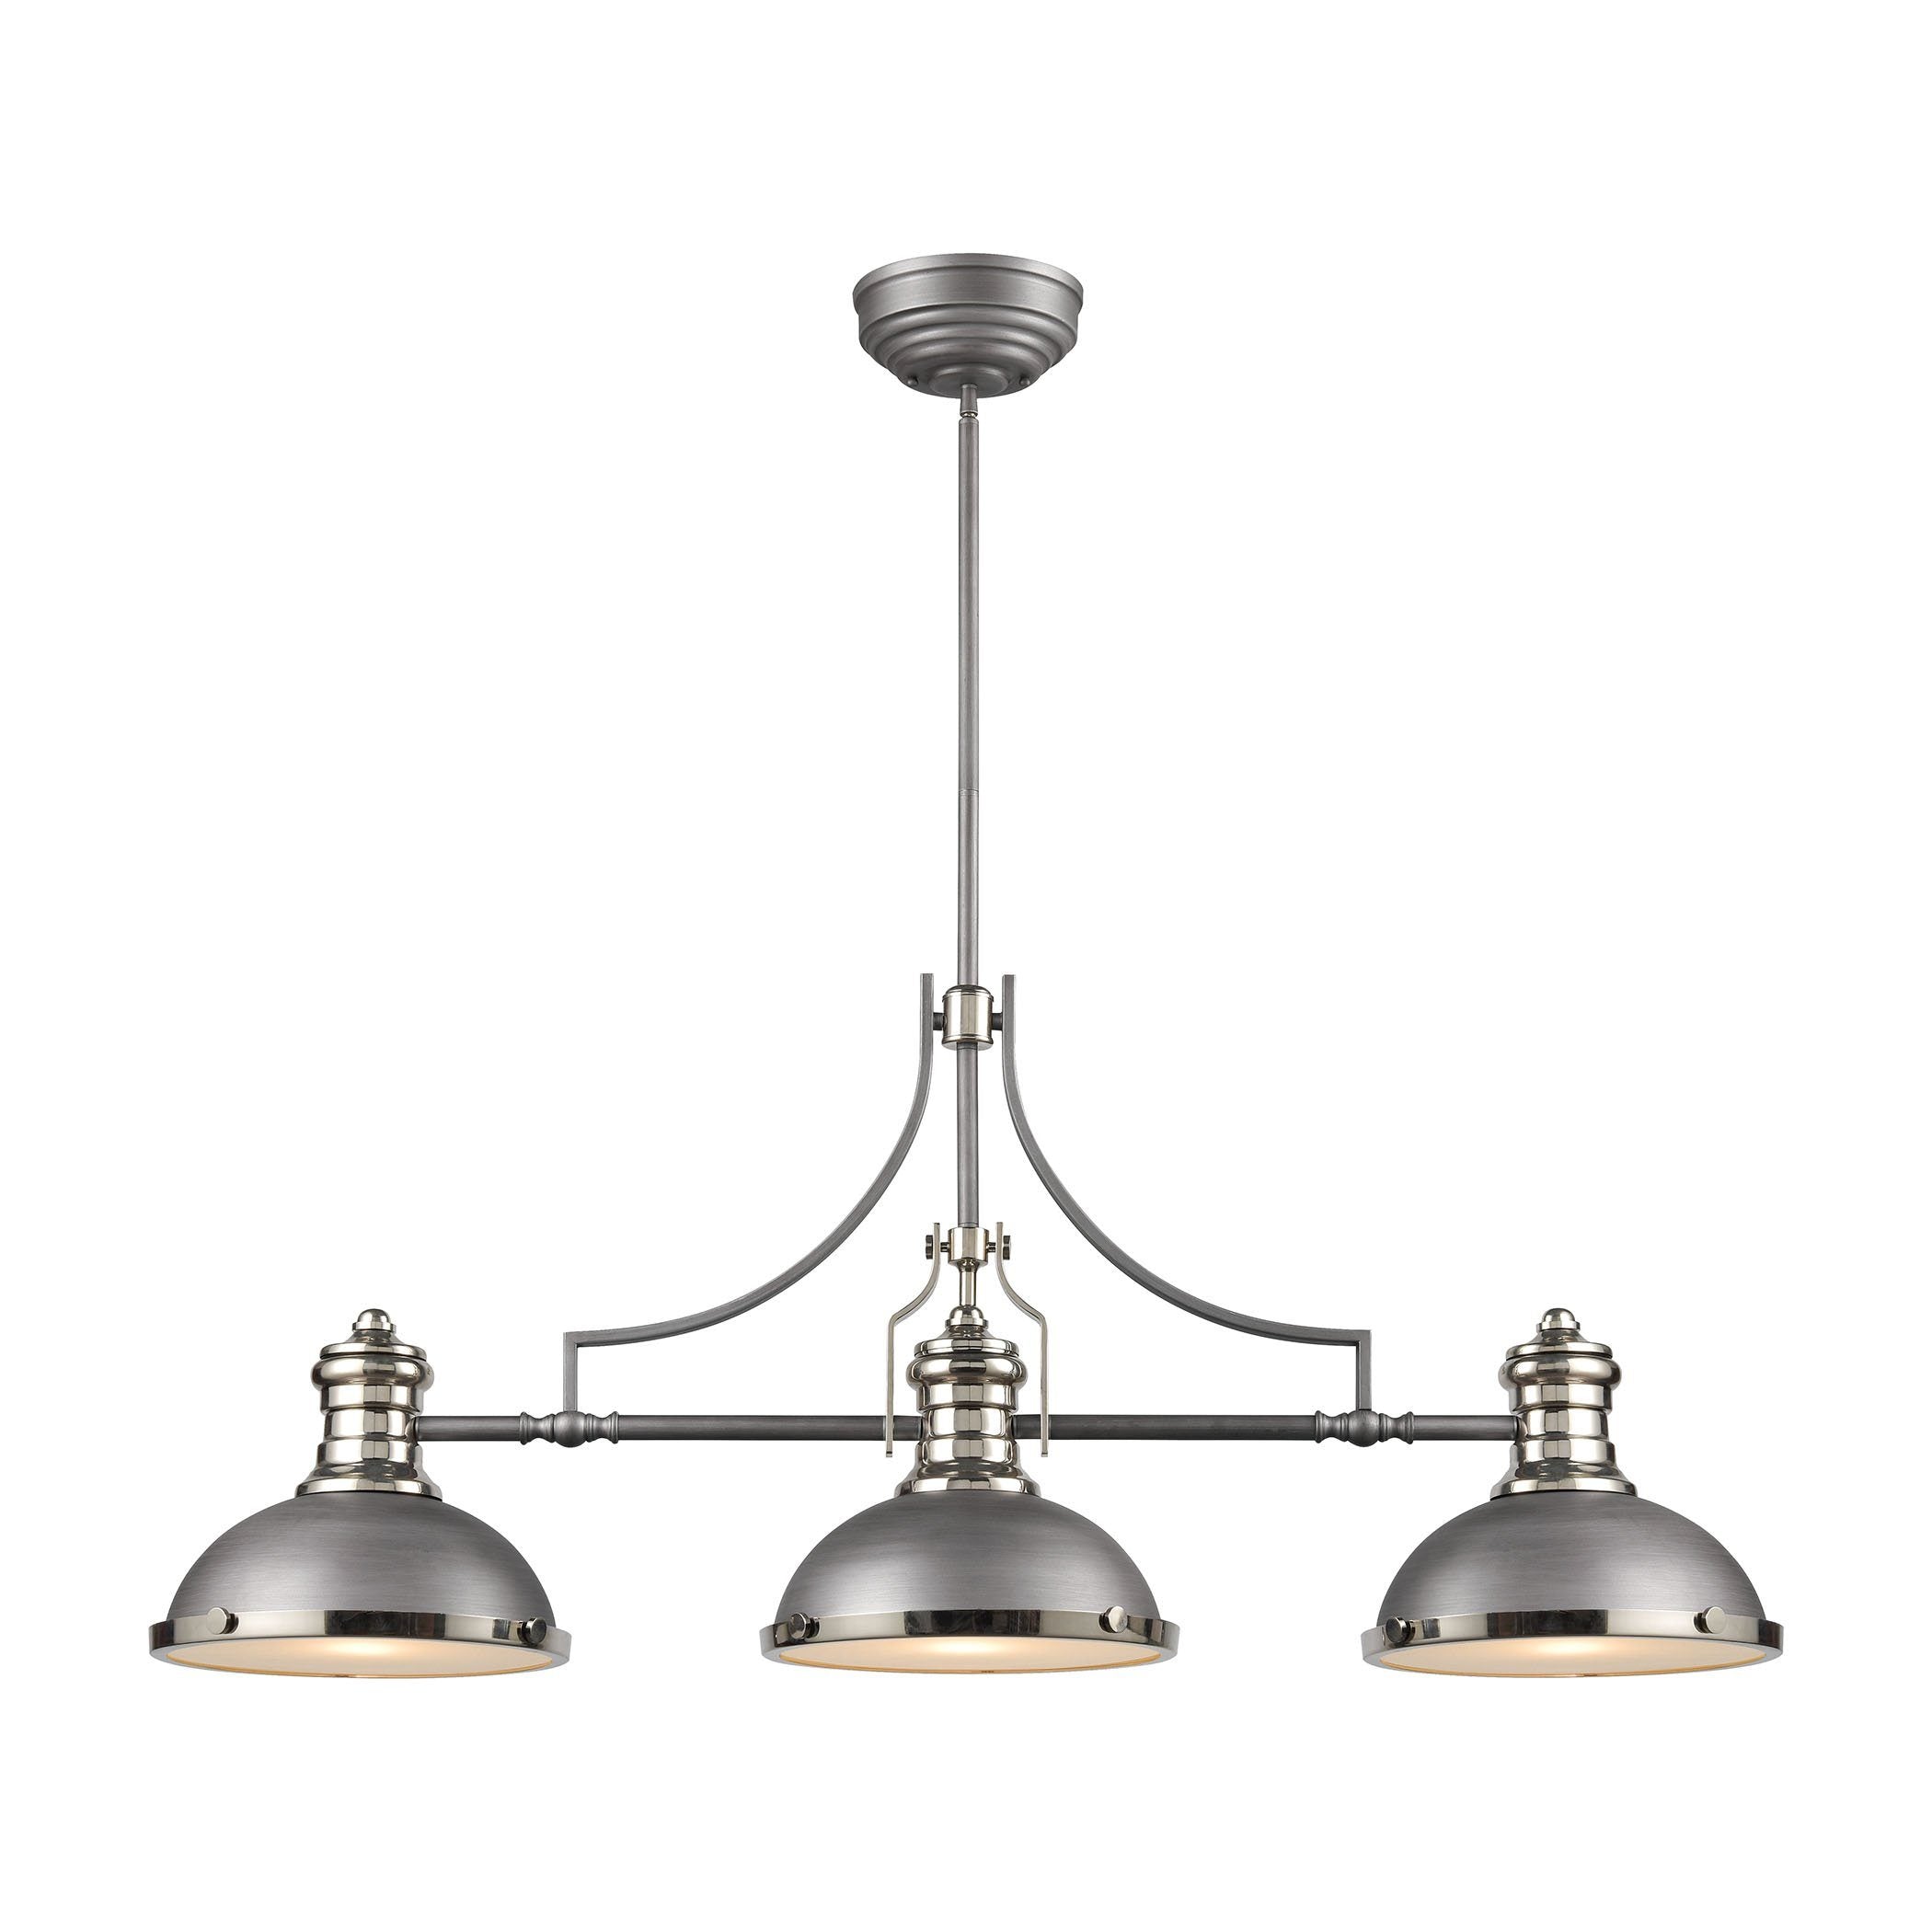 Chadwick 3-Light Island Light in Weathered Zinc with Metal and Frosted Glass Ceiling Elk Lighting 